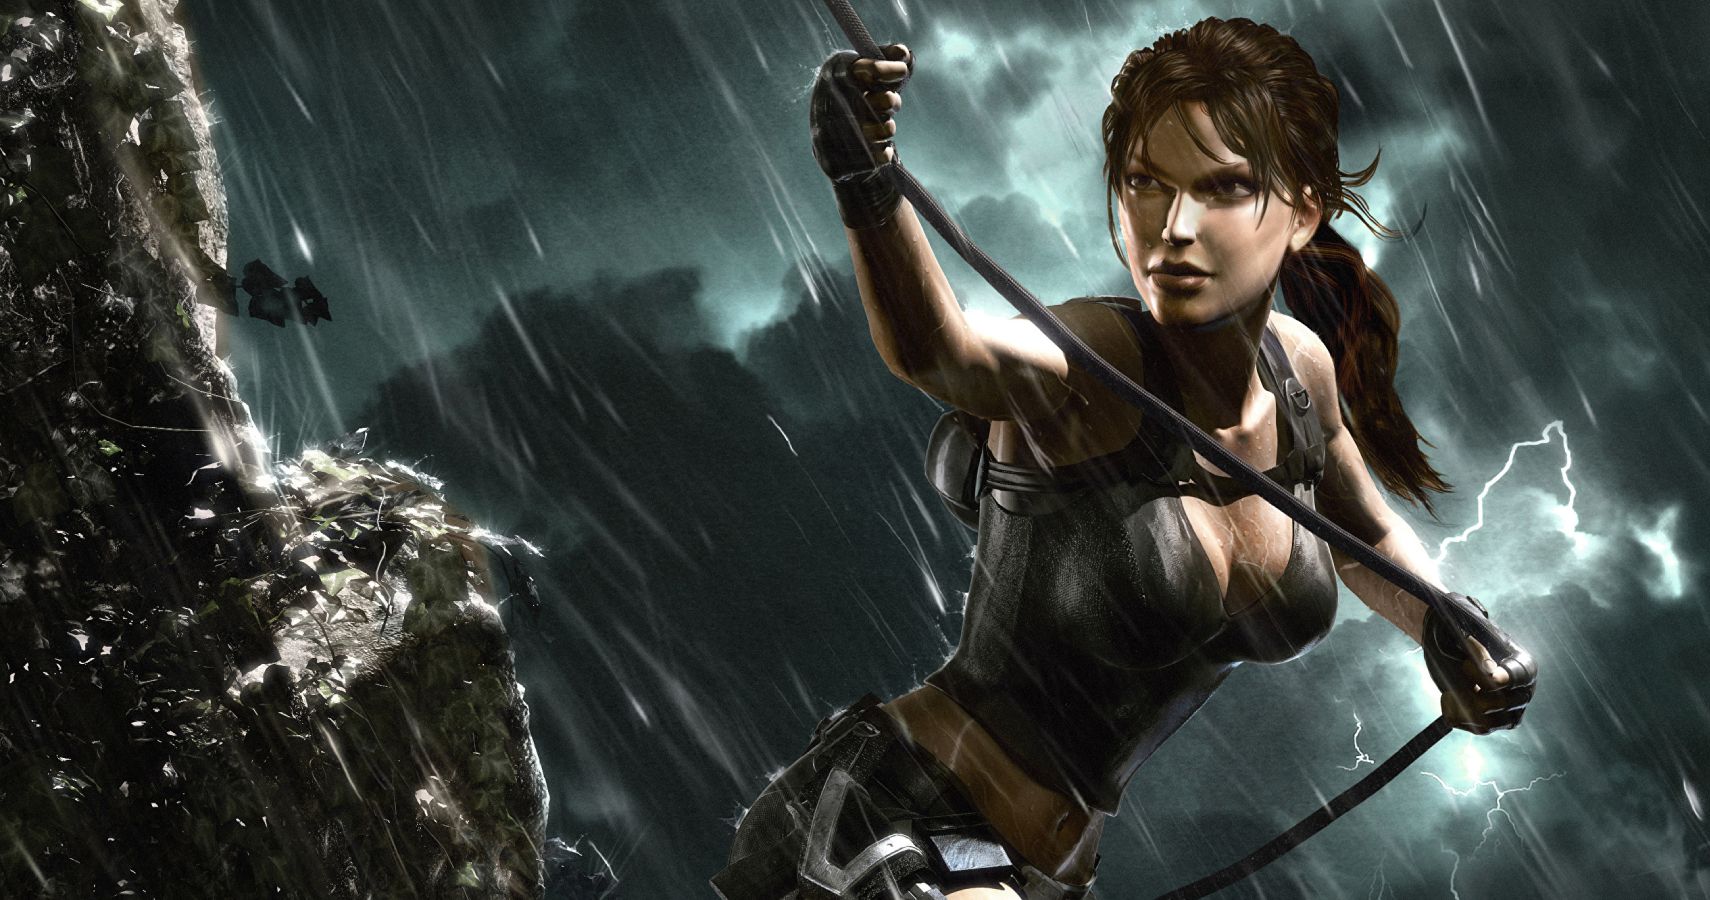 The original Tomb Raider is the most wanted remastered game, study